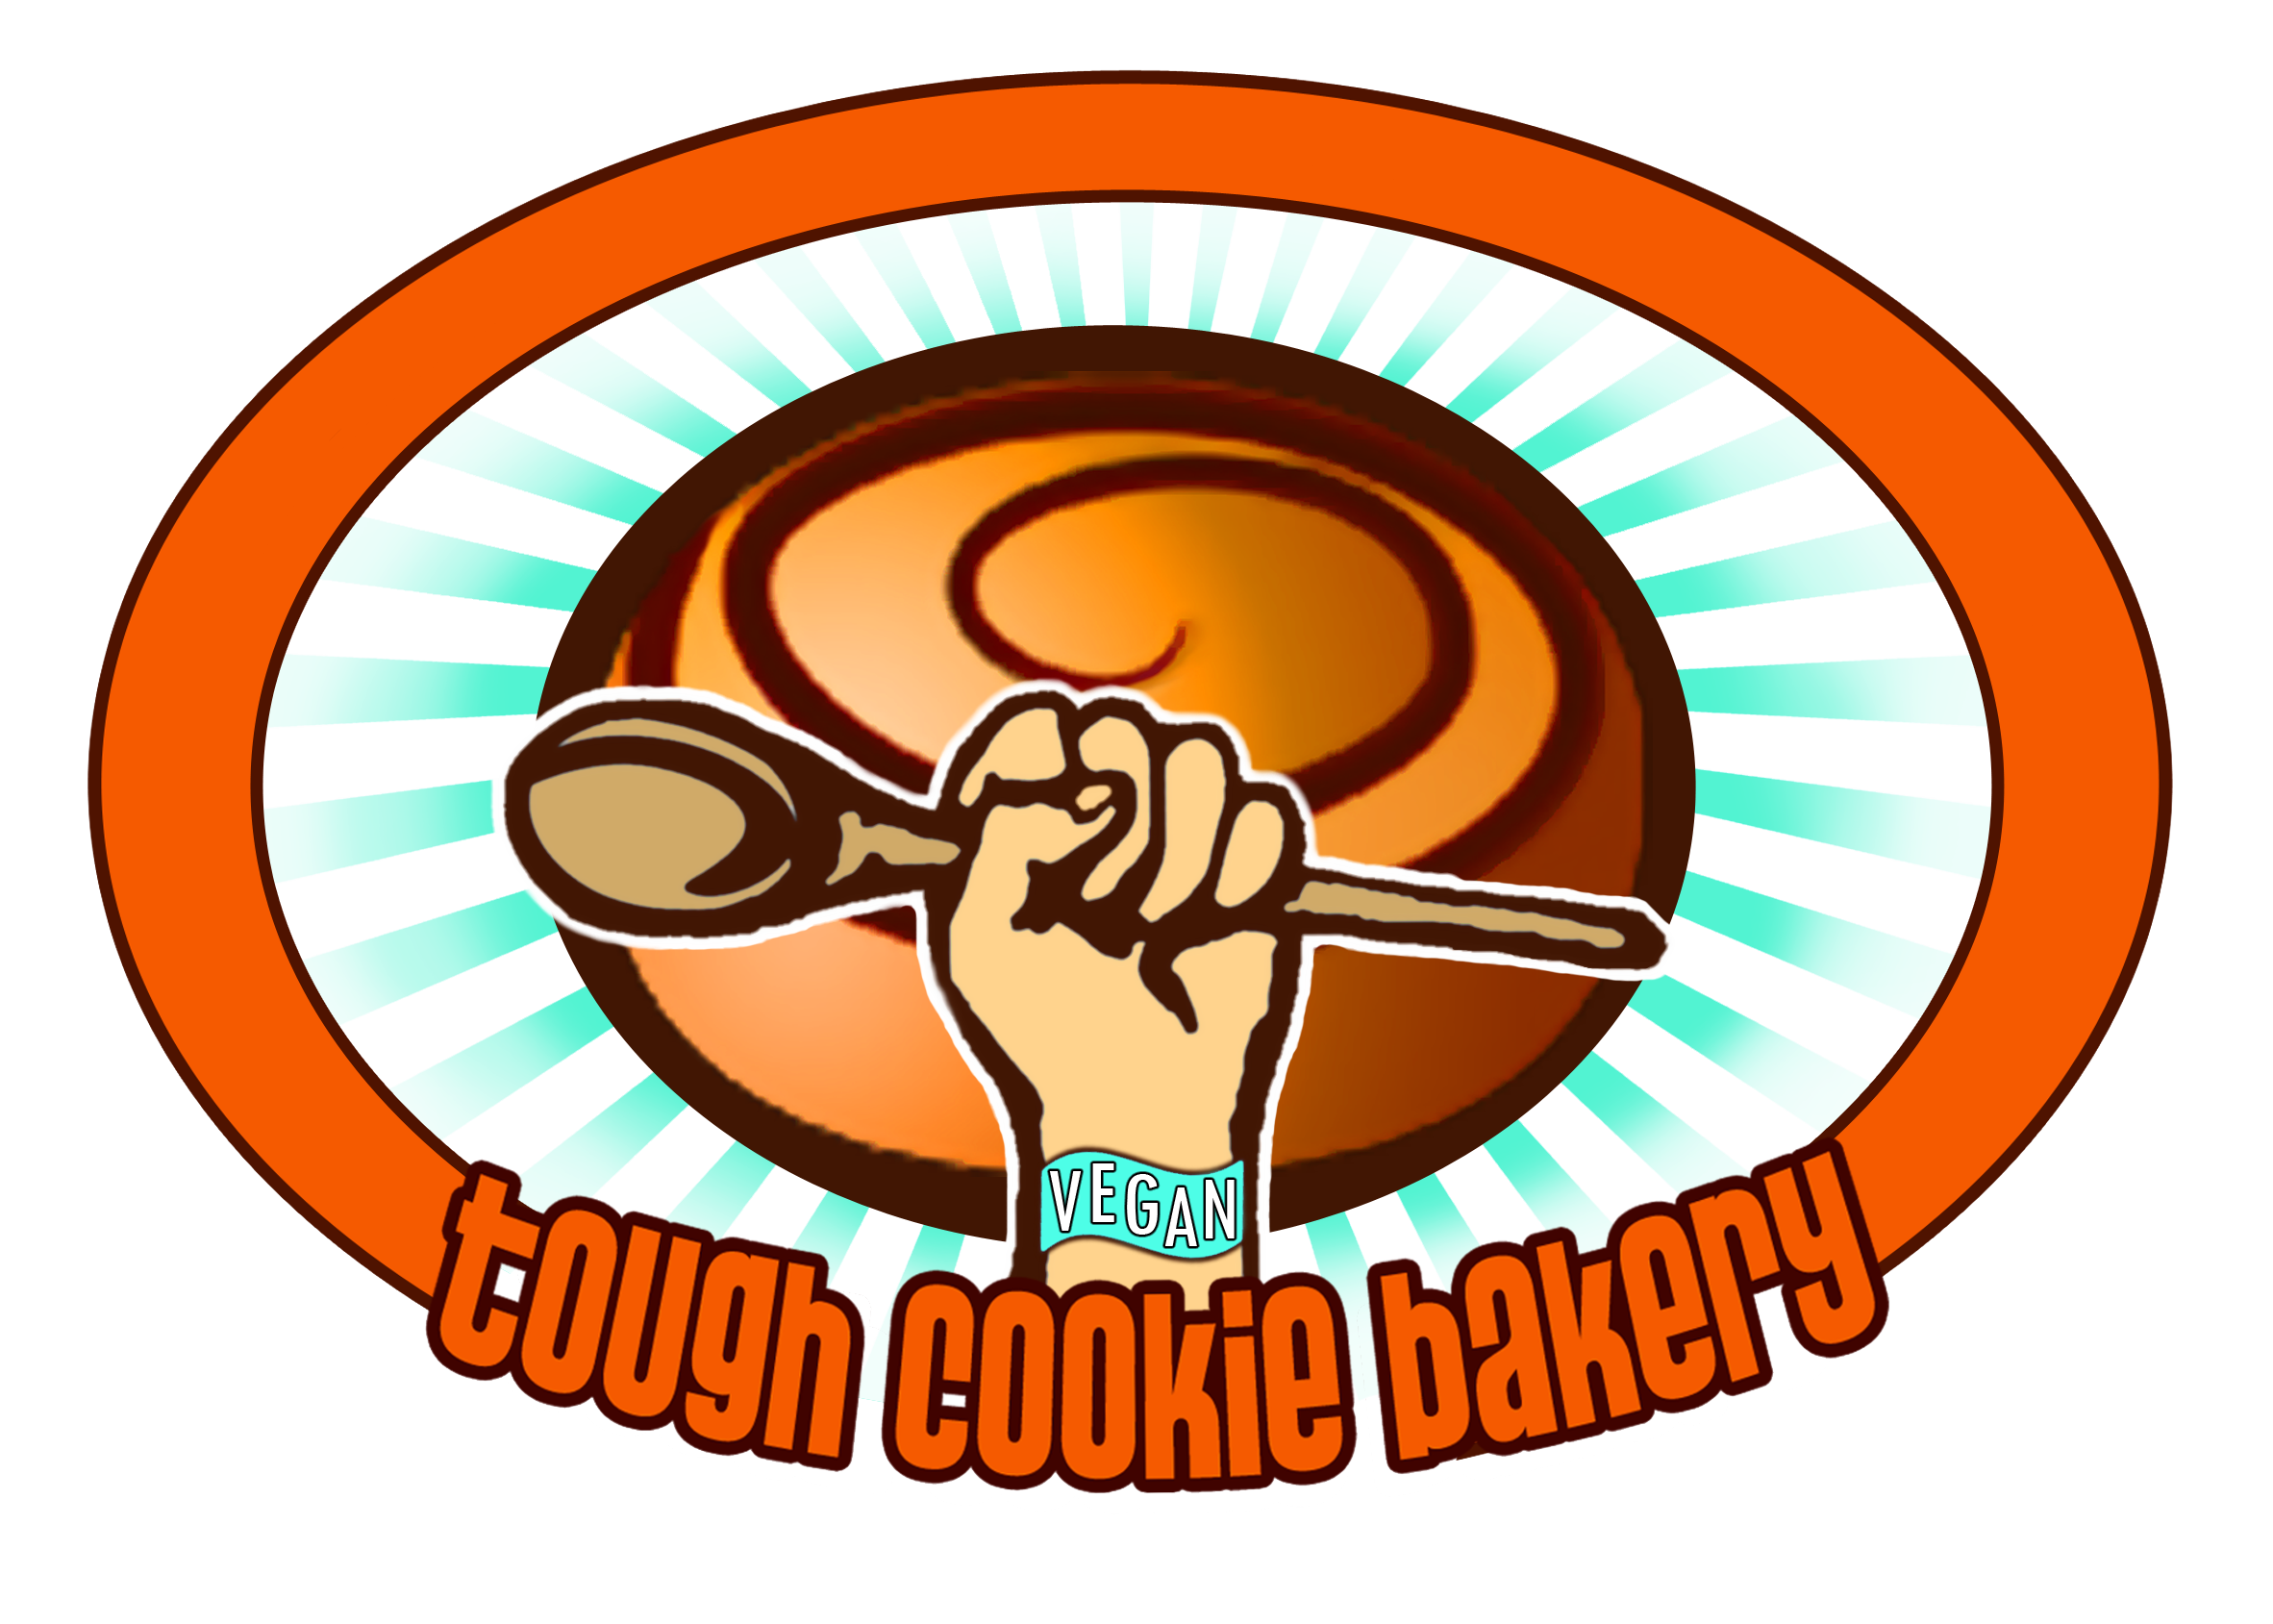 Tough Cookie Bakery